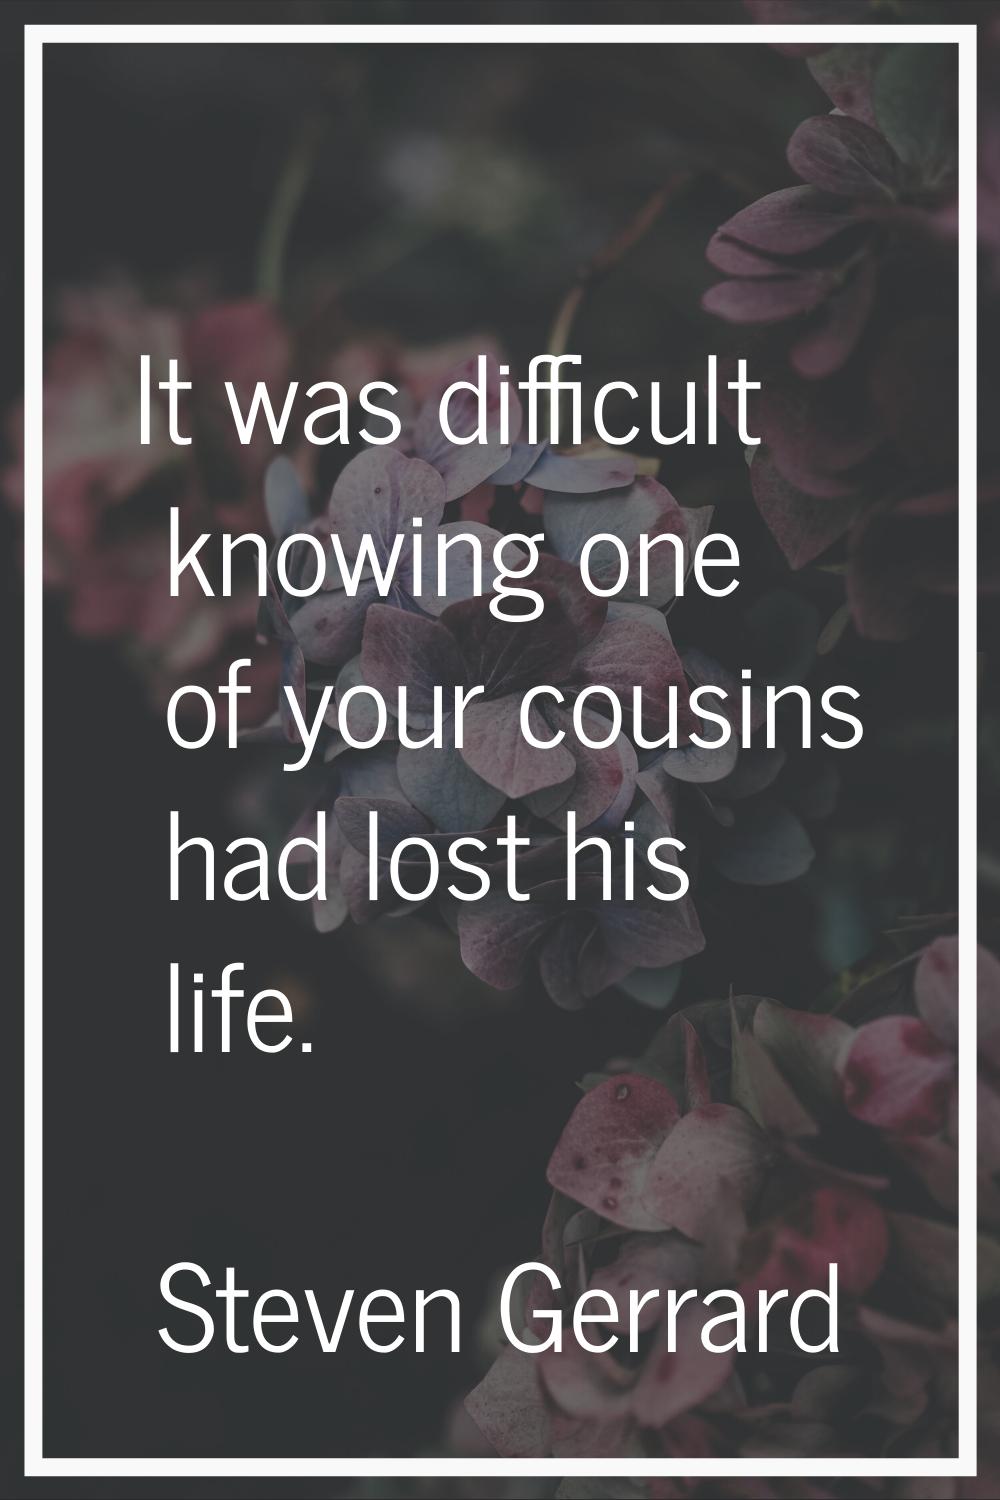 It was difficult knowing one of your cousins had lost his life.